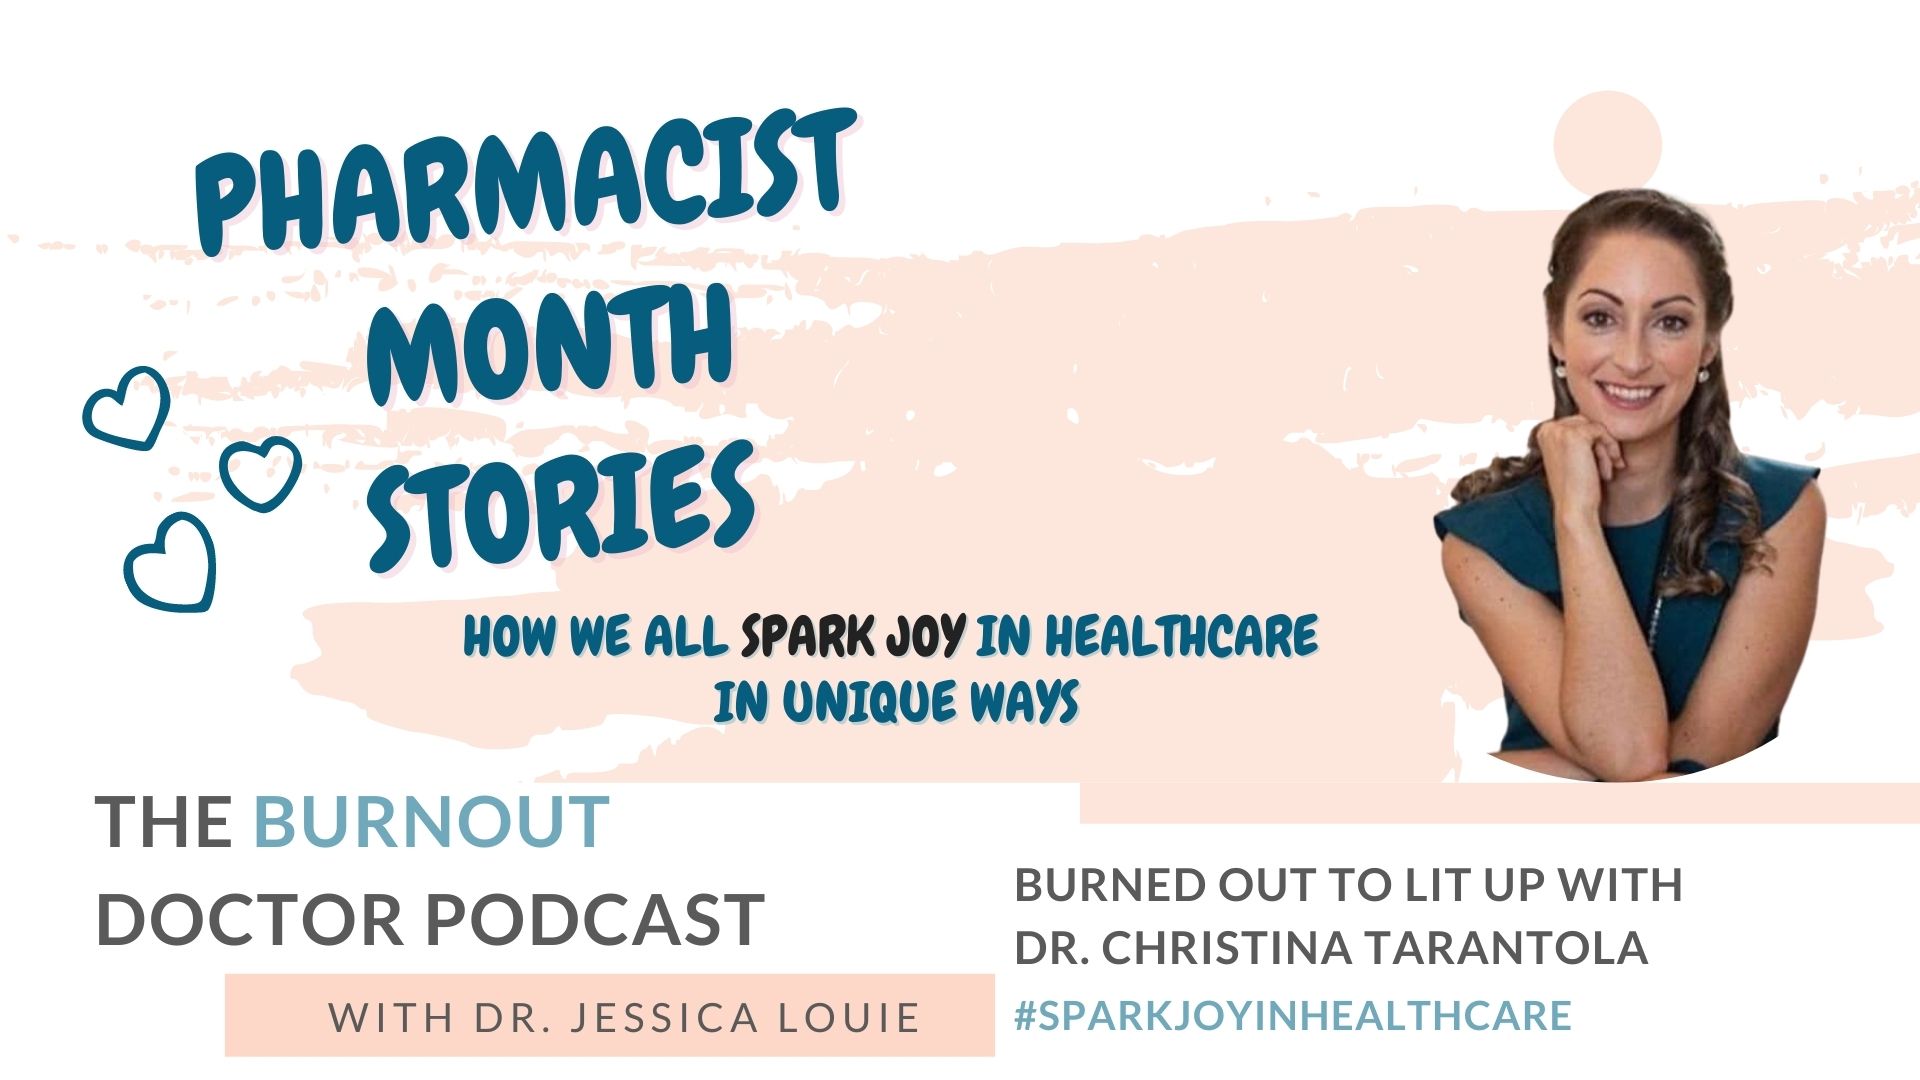 Dr. Christina Tarantola on The Burnout Doctor Podcast with Dr. Jessica Louie and Pharmacist Month Stories. Spark Joy in Healthcare. Pharmacist Burnout and side hustles